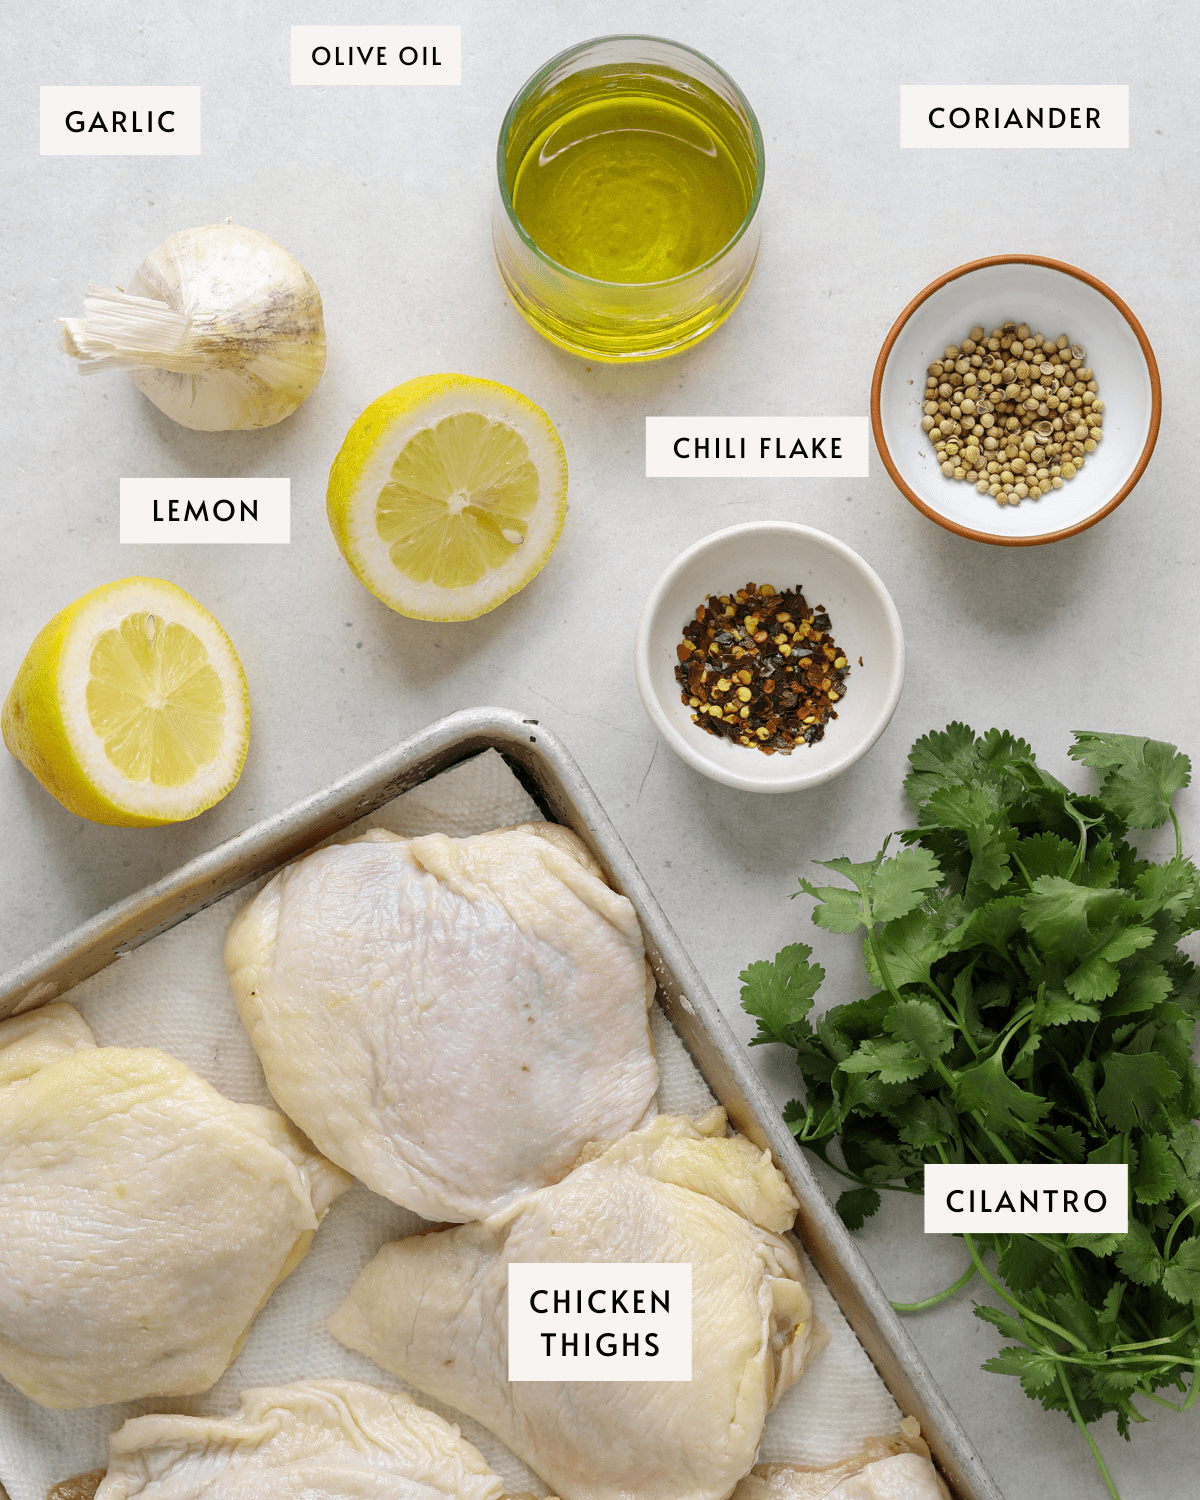 a baking tray with raw chicken thighs, tiny bowls of coriander and chili flakes, a lemon sliced in half, a bulb of garlic and a bunch of cilantro.